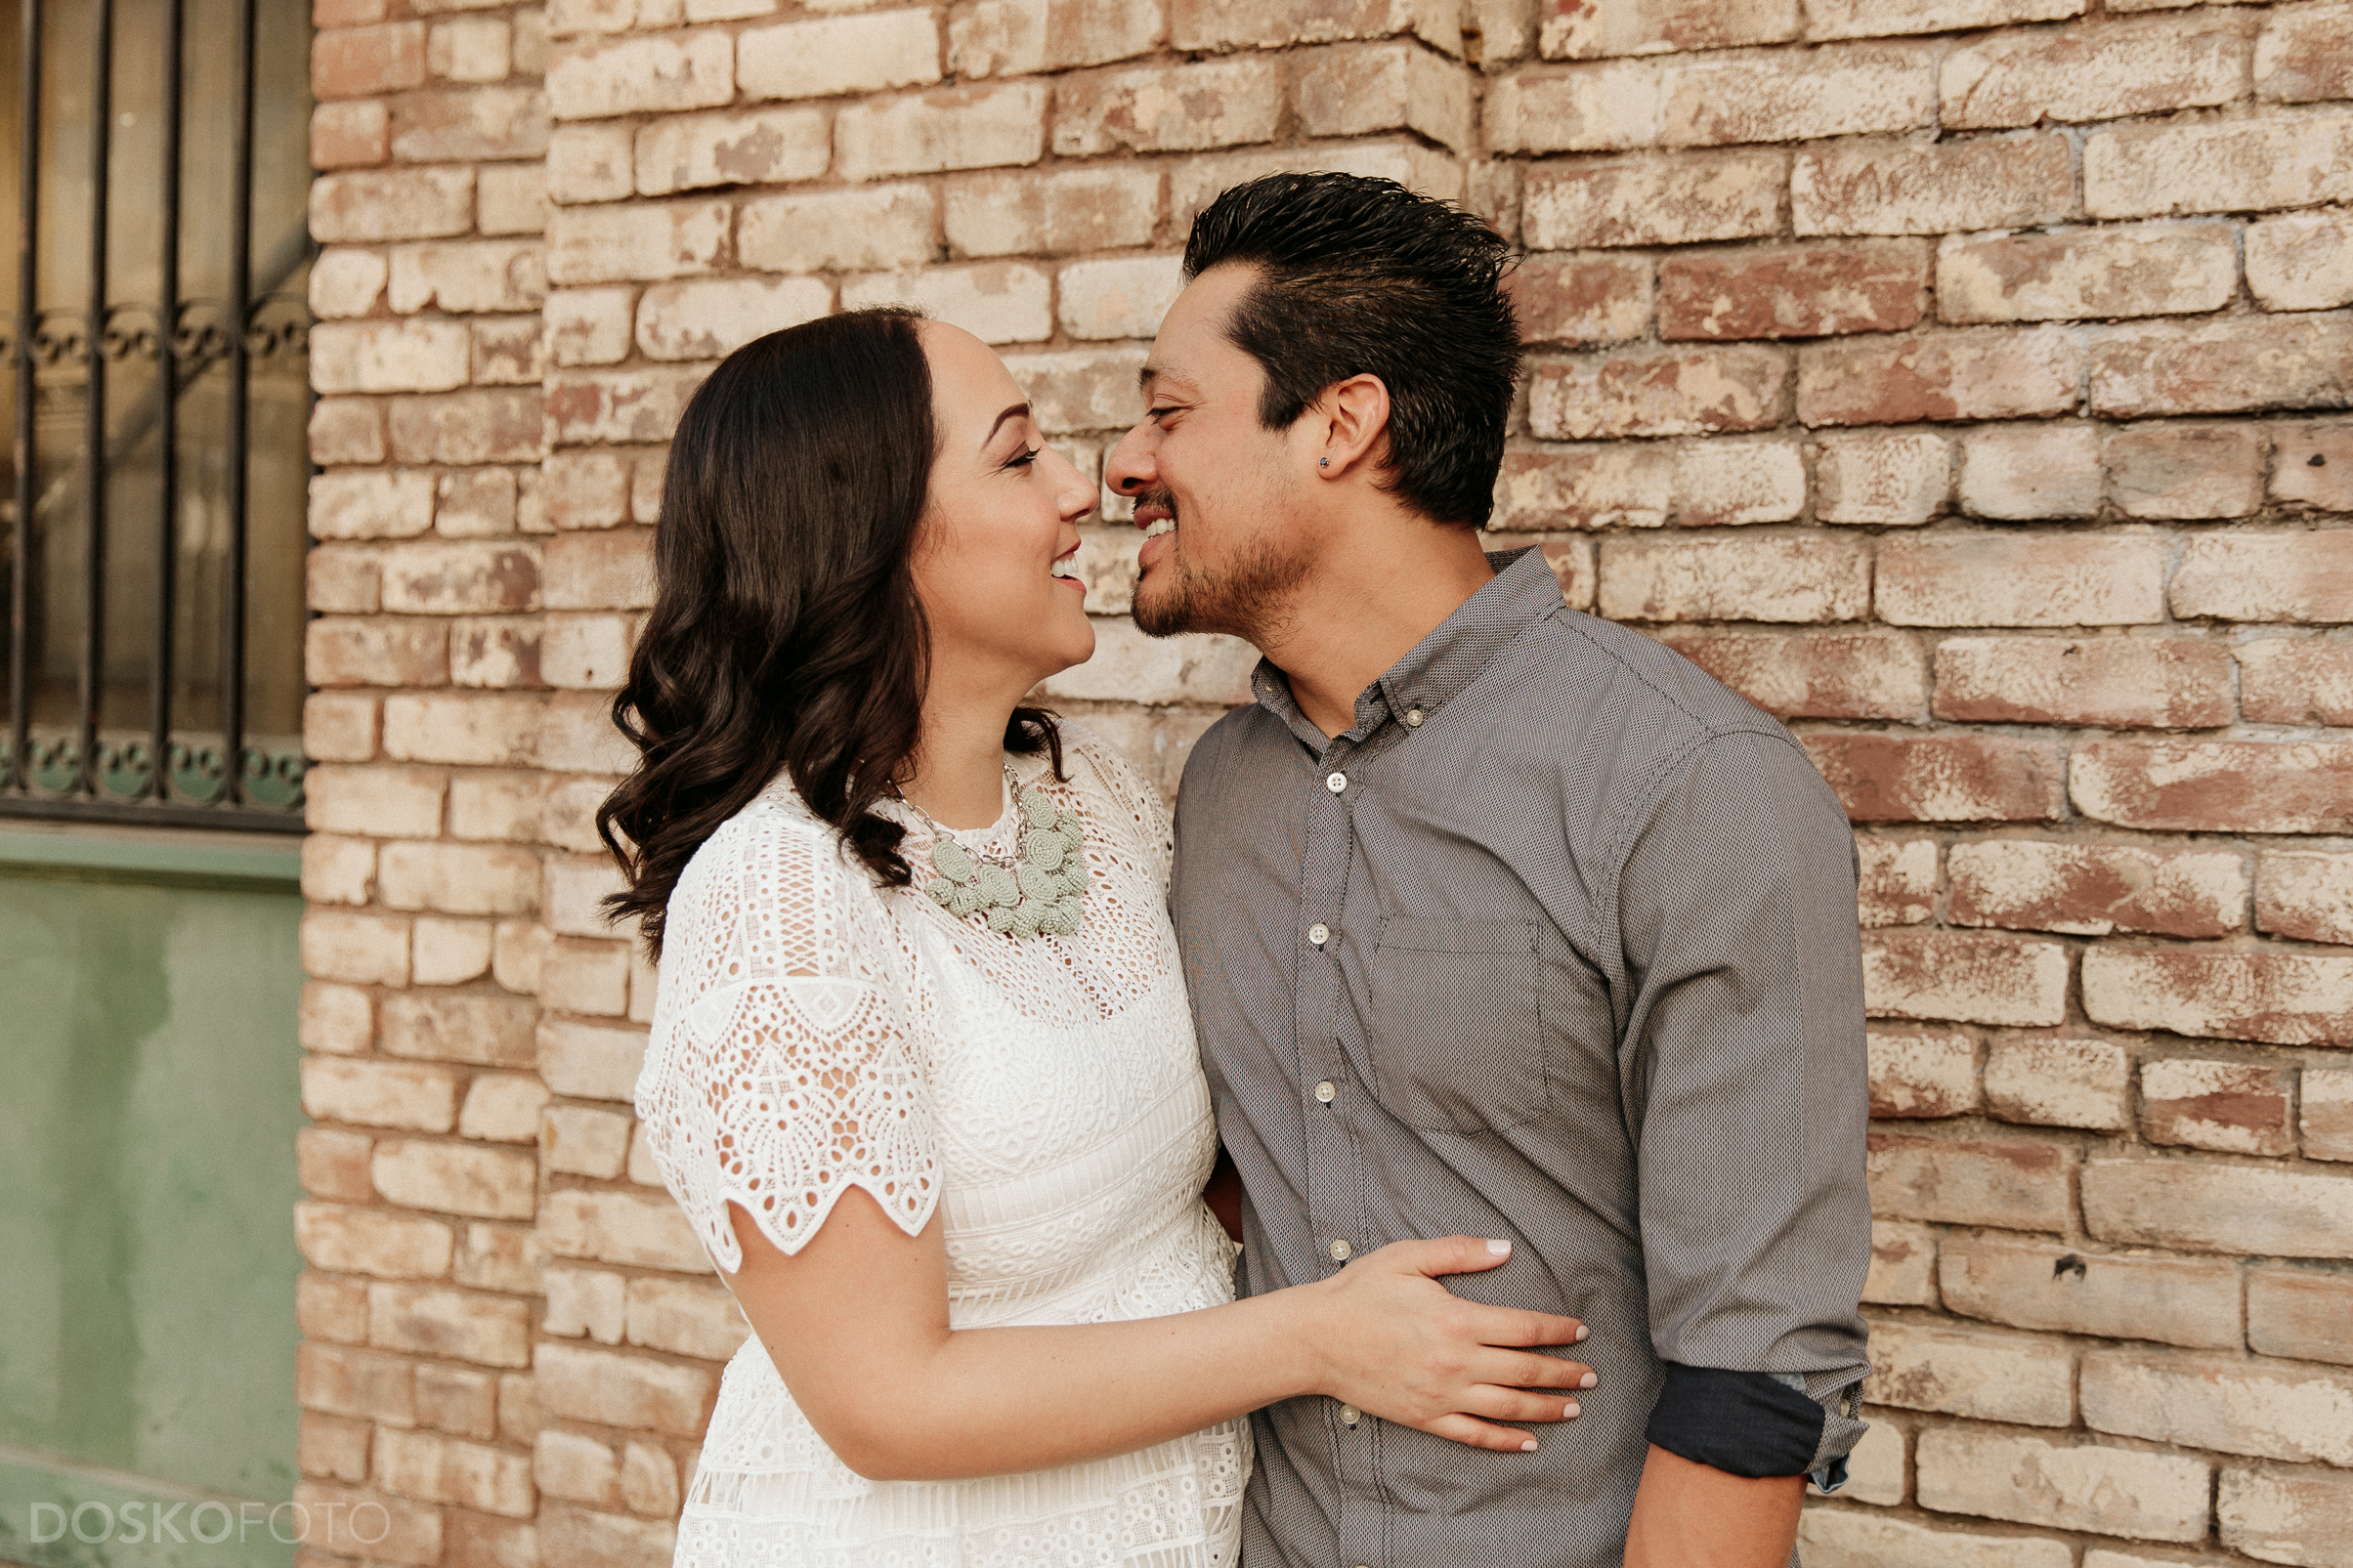 Amanda Doskocil (DOSKOFOTO), a Long Beach Wedding Photographer, travels downtown with Luis and Suzanne for an urban Los Angeles engagement photoshoot at the Nate Starkman &amp; Son building.